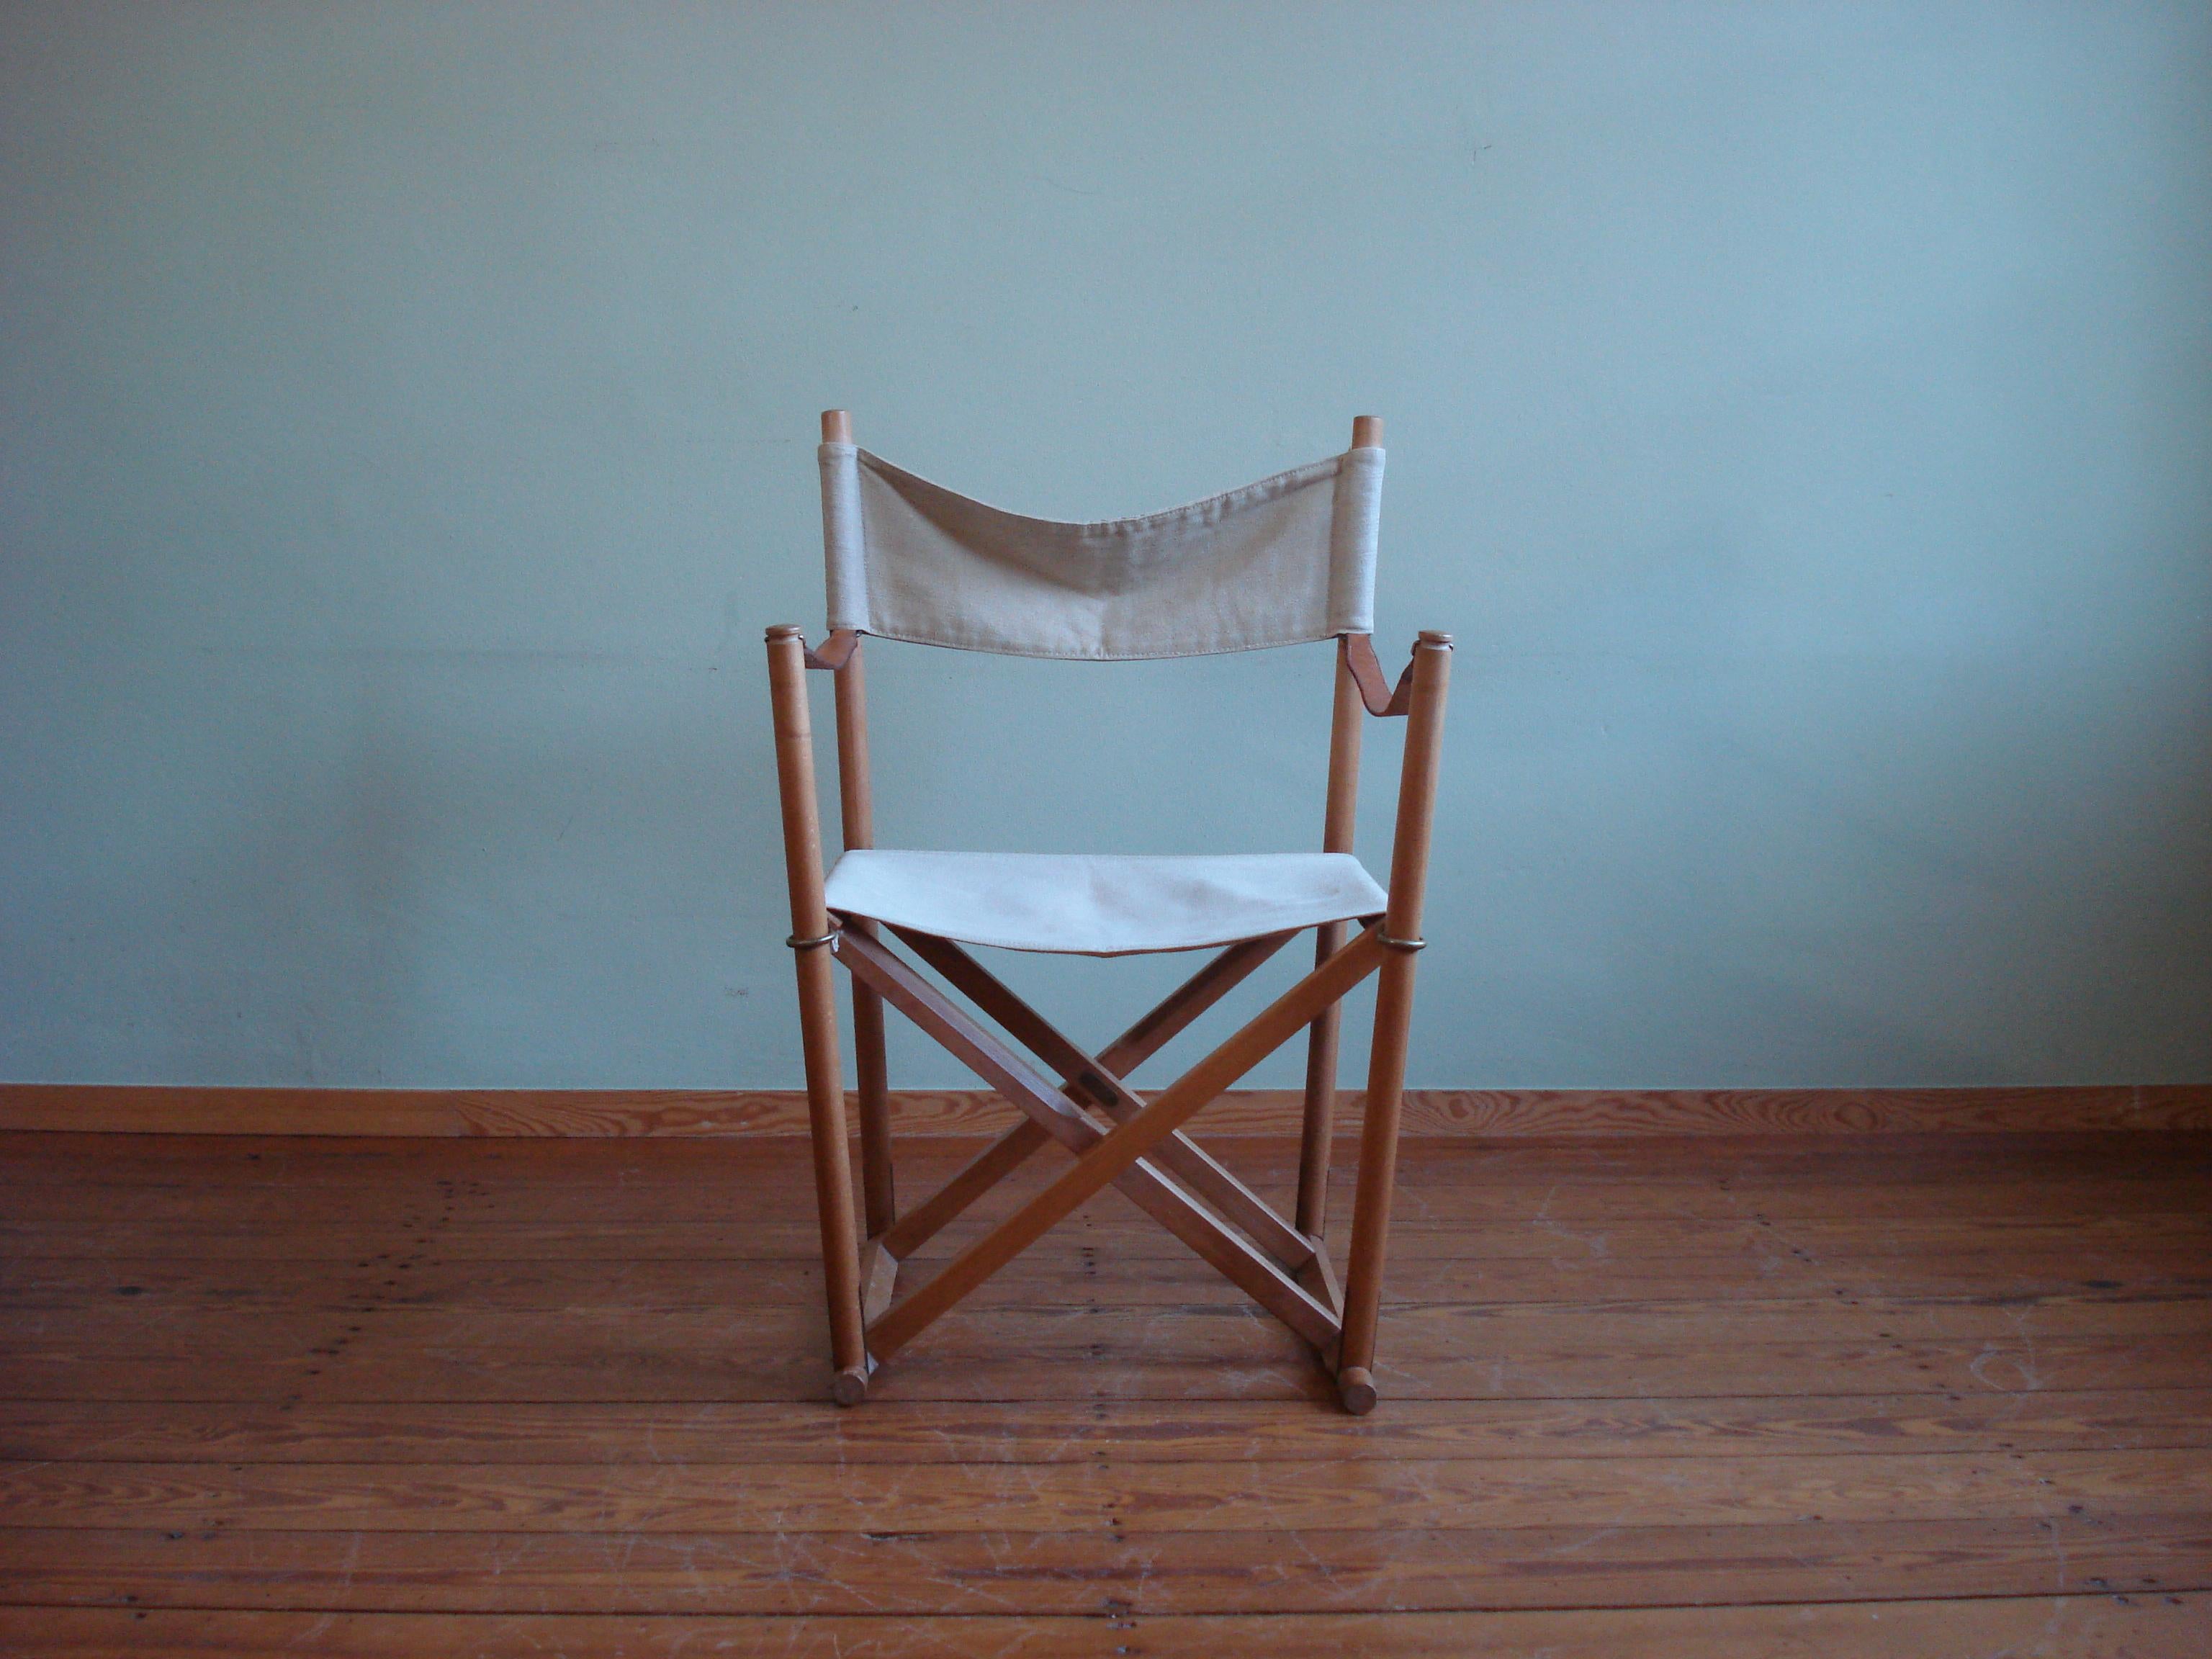 High quality build folding safari chair from around the 1960s.

These rare to find chairs were designed by danish architect Mogens Koch for the manufacturer Interna, these chairs set the standard for comfort, elegance and usability. 

The frame is